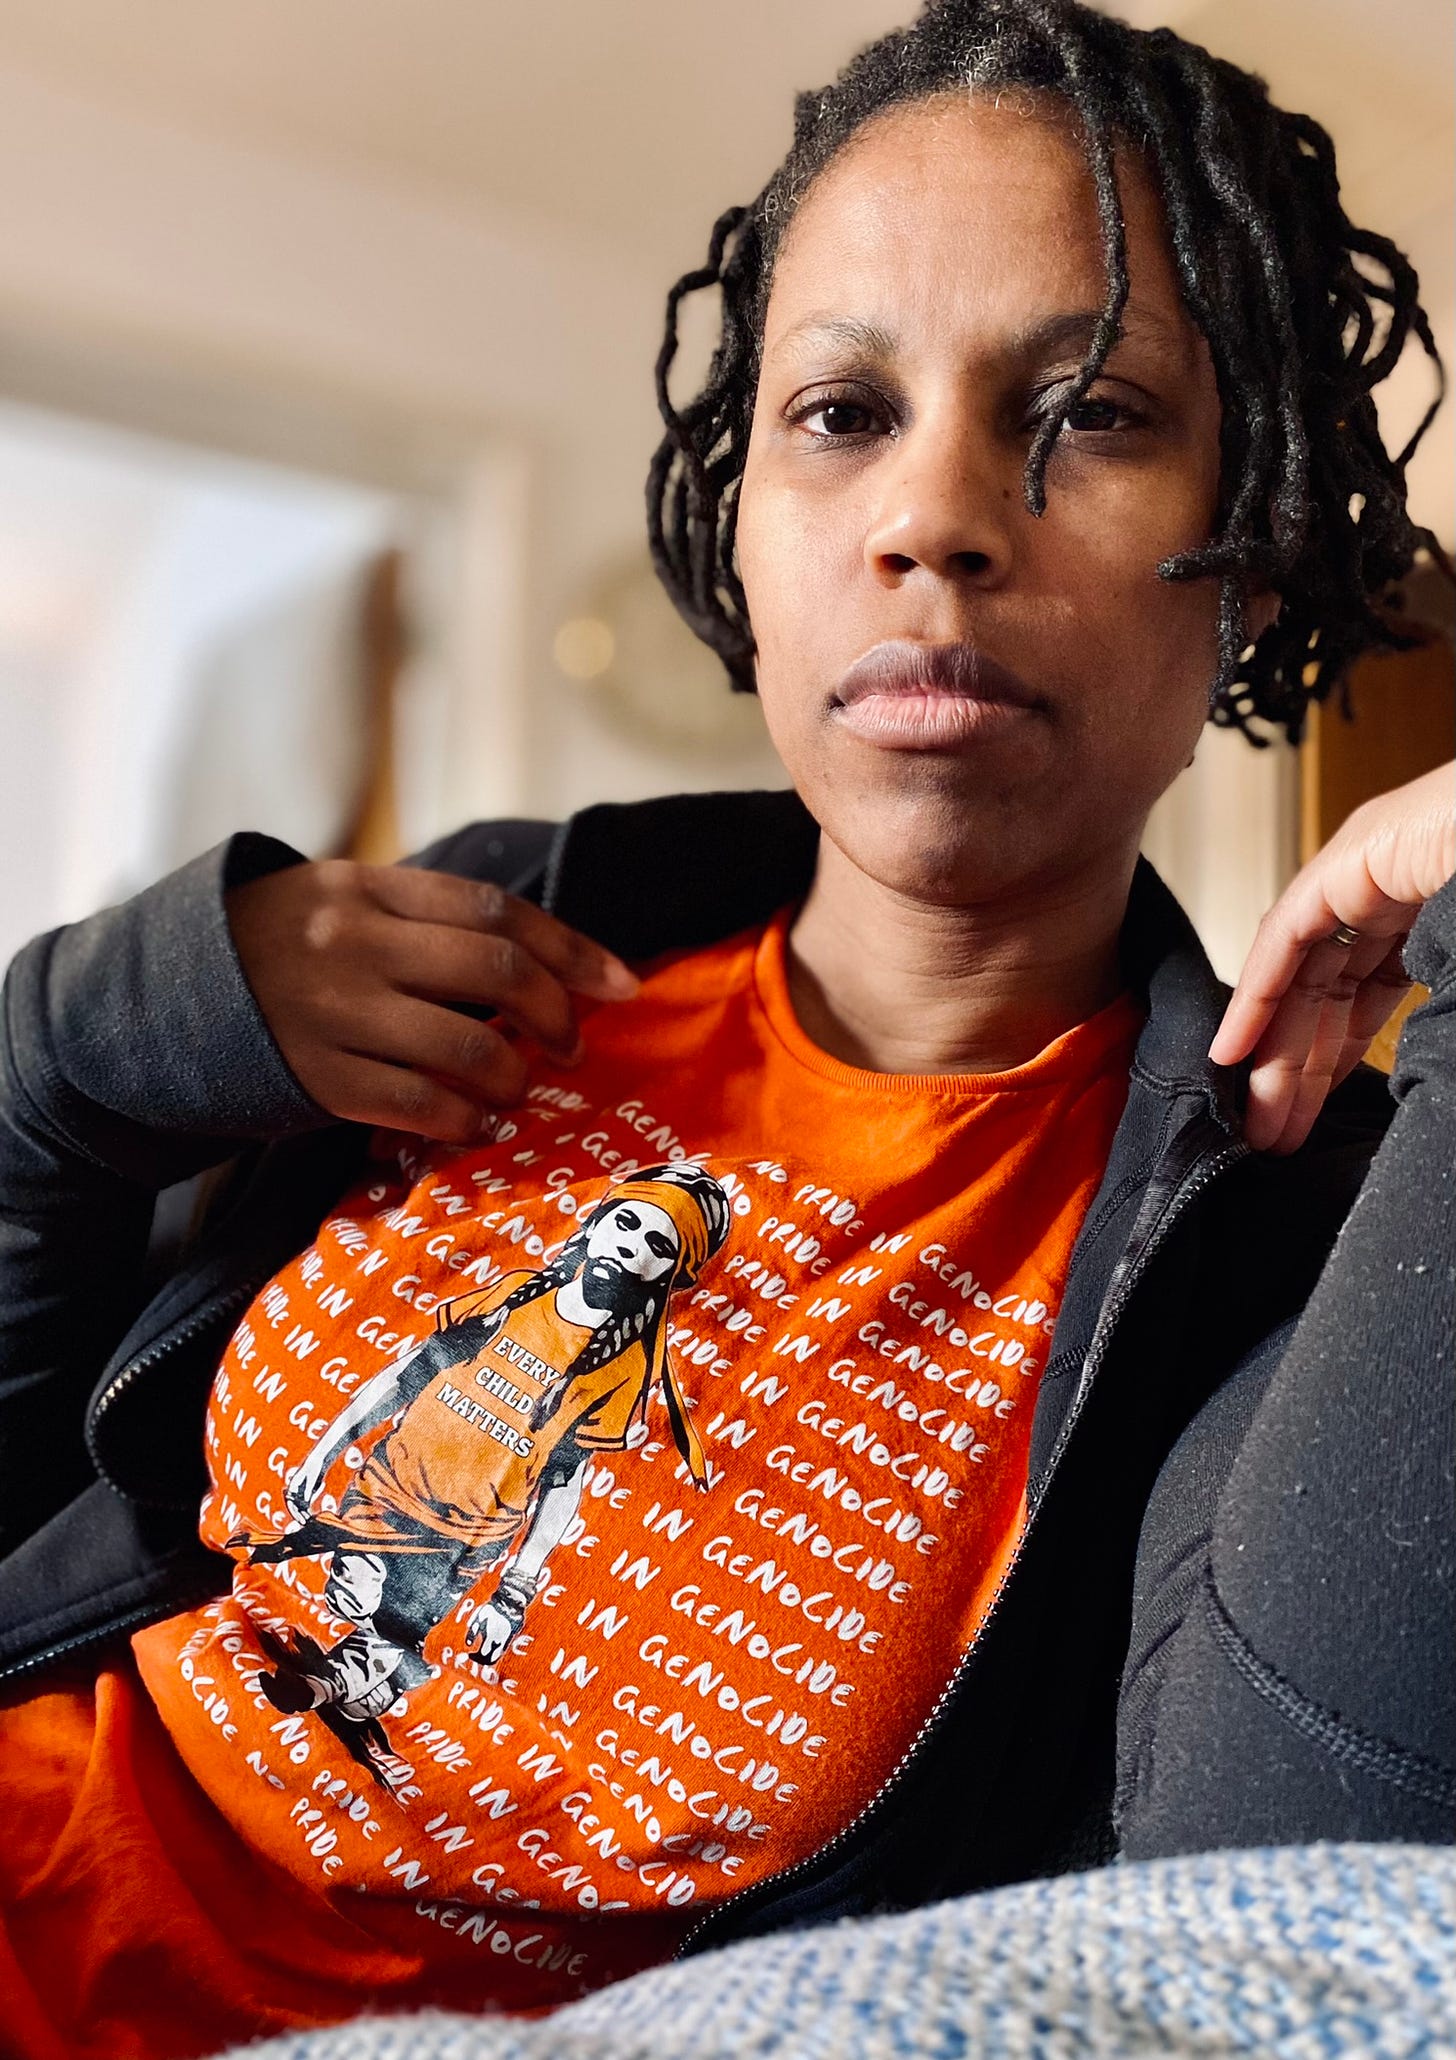 Sandra is a Black femme with short black locs staring into the camera wearing a bright orange shirt with an Indigenous child on it. The shirt repeats no pride in genocide. The Indigenous child wears a shirt that says, every child matters.